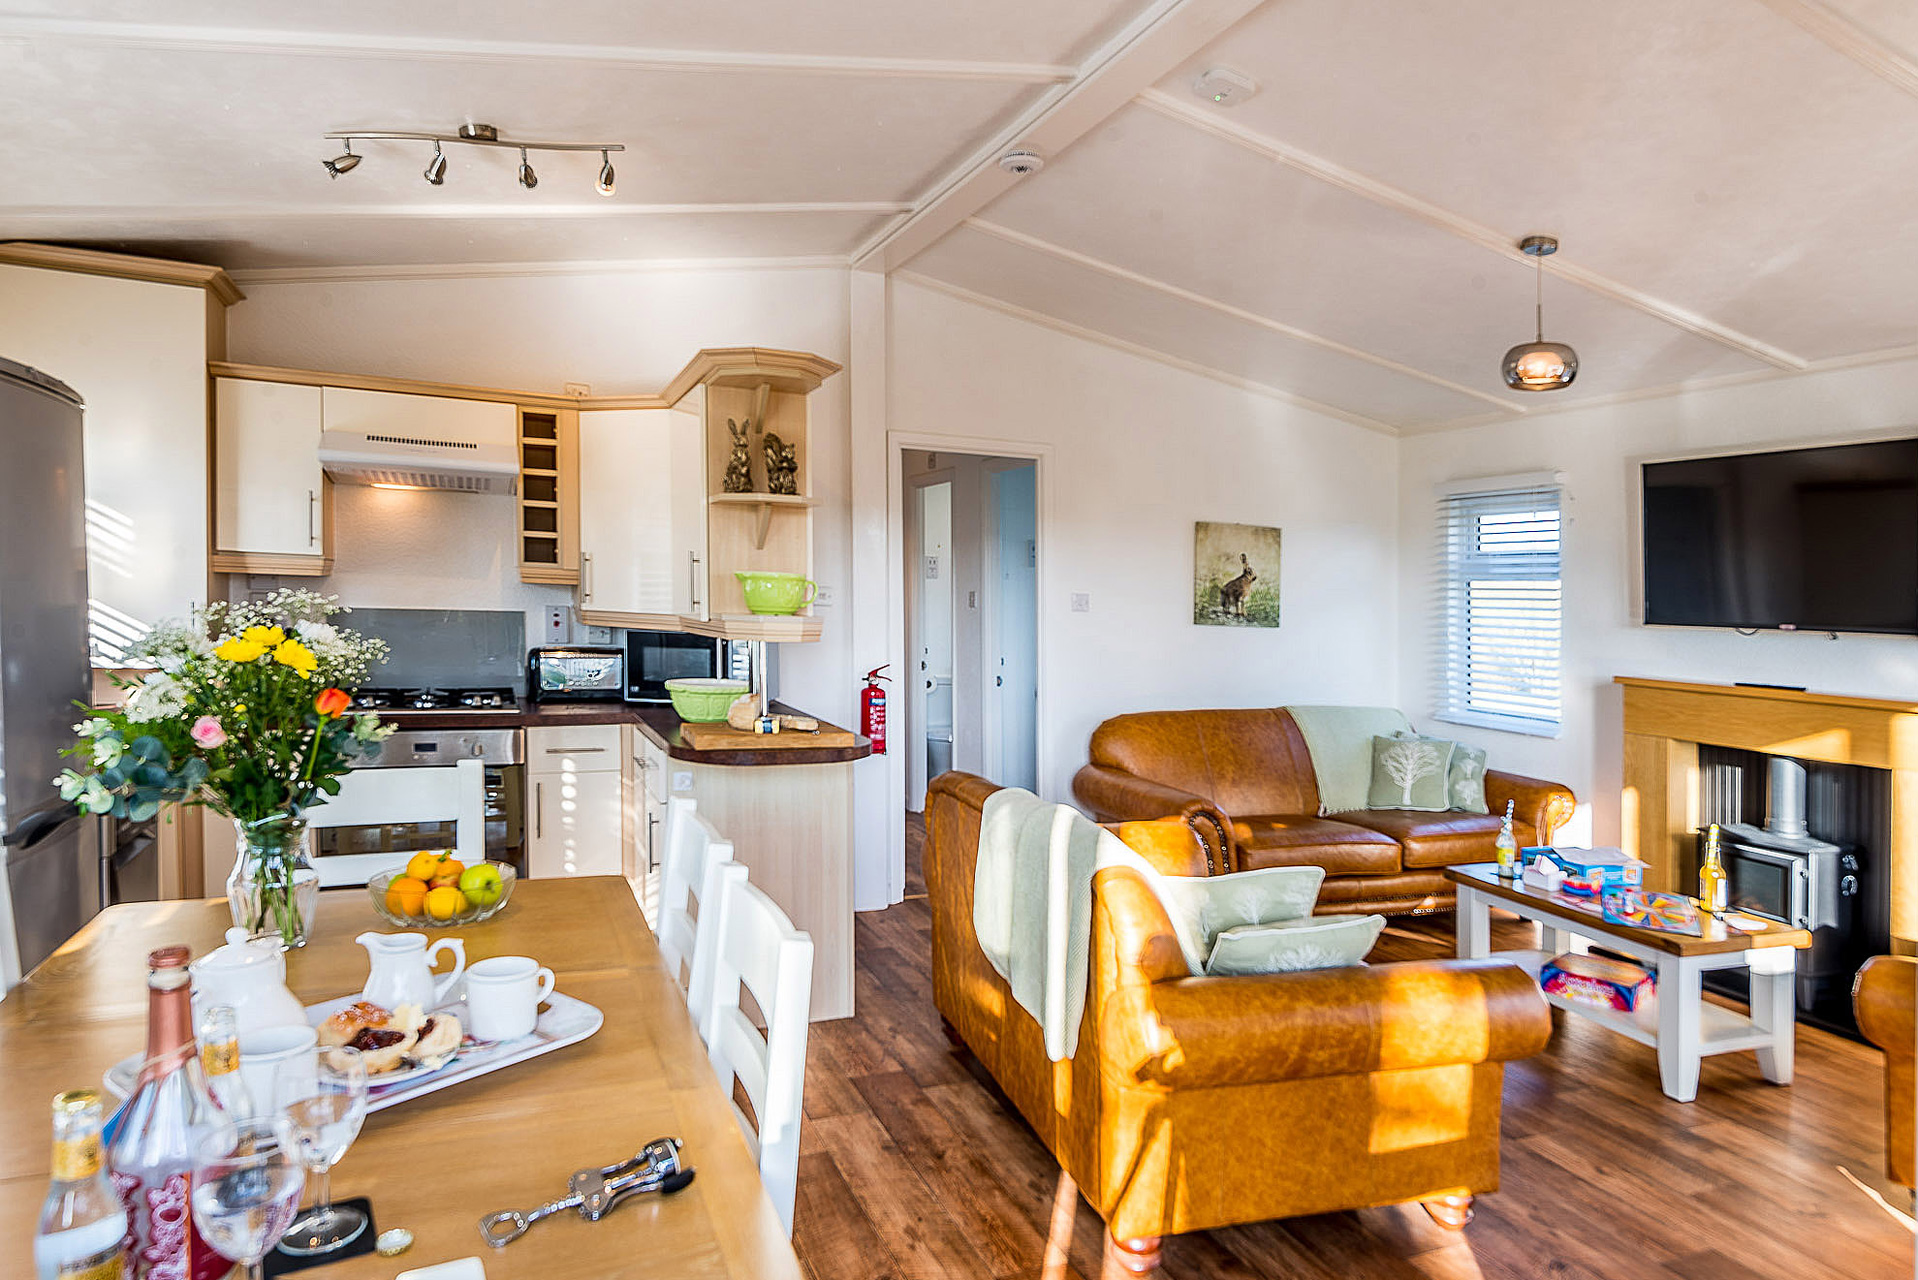 Rowan Lodge at St. Tinney Farm Holidays in Cornwall - Lounge area with free WiFi and 50 inch smart TV